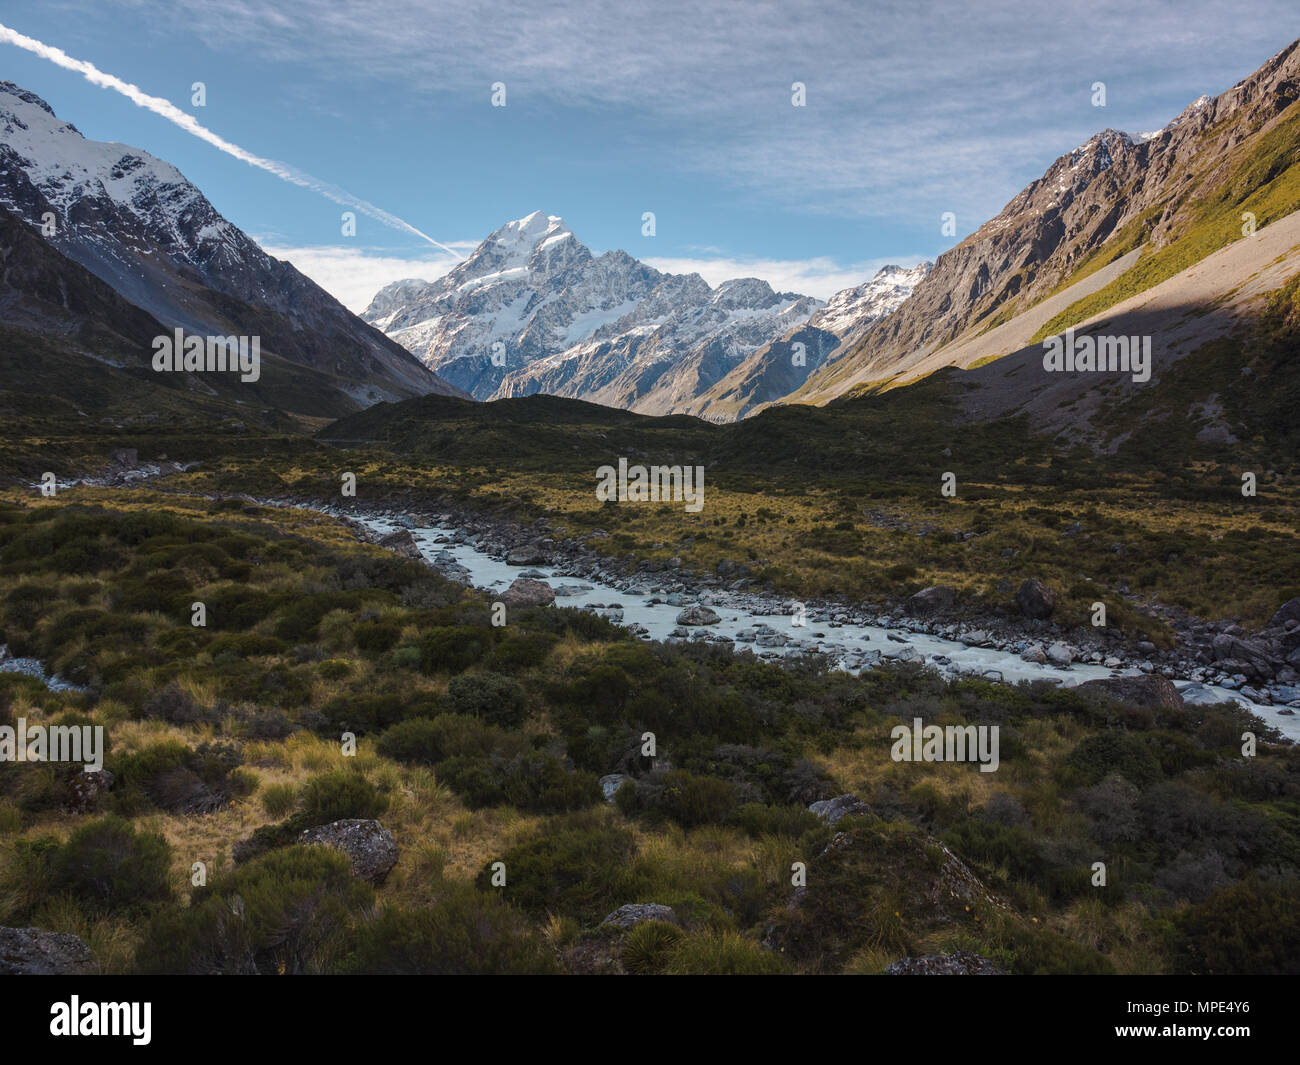 Mount. Cook in daytime, viewed from the Hooker Valley Stock Photo